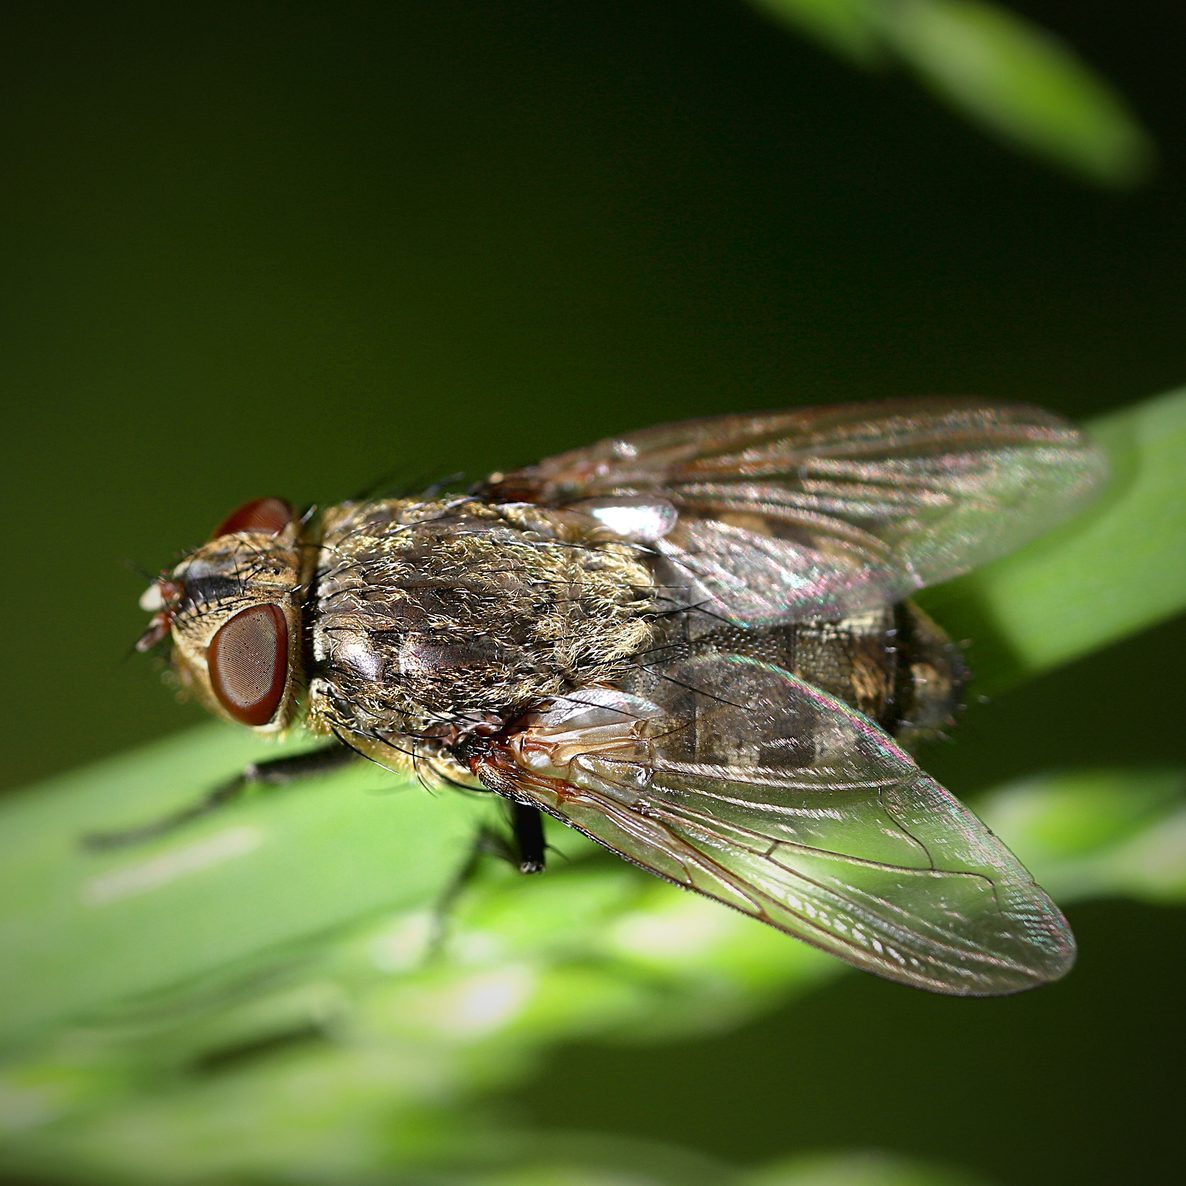 Large female Cluster Fly, aka, Grass or Attic Fly (Pollenia sp.)